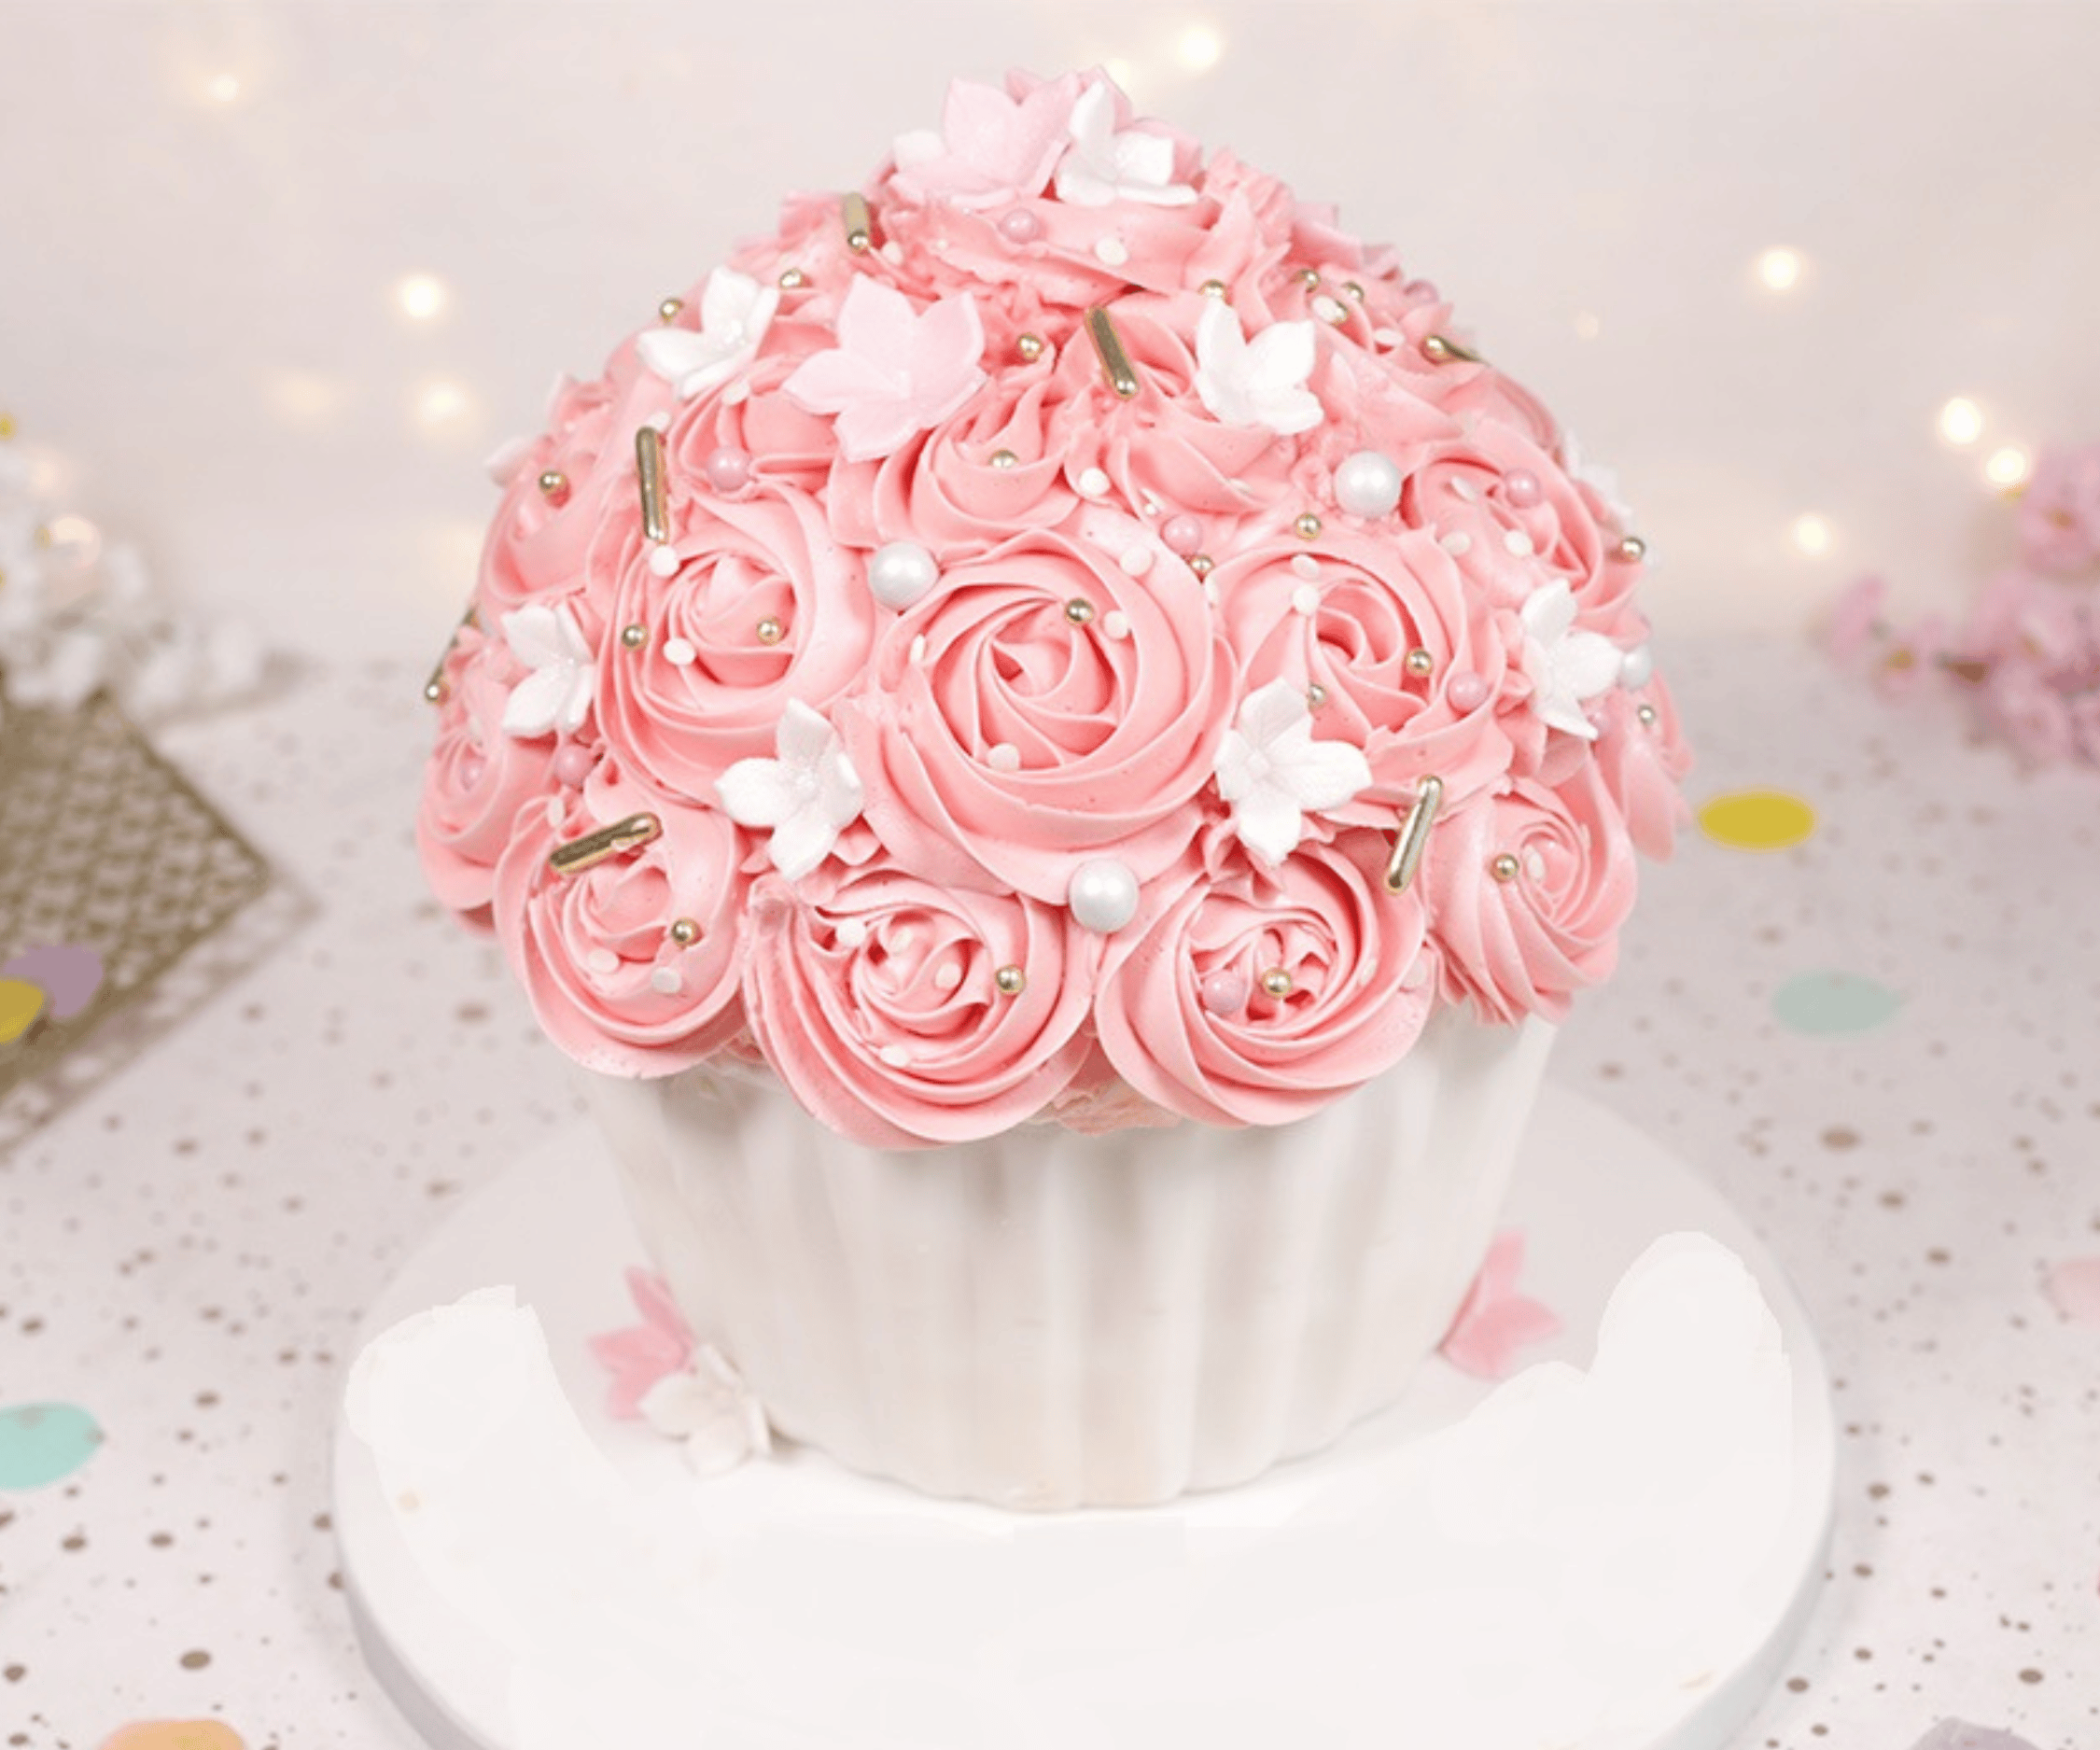 Giant Cupcake Cake | Sprinkle Surprise - This Delicious House